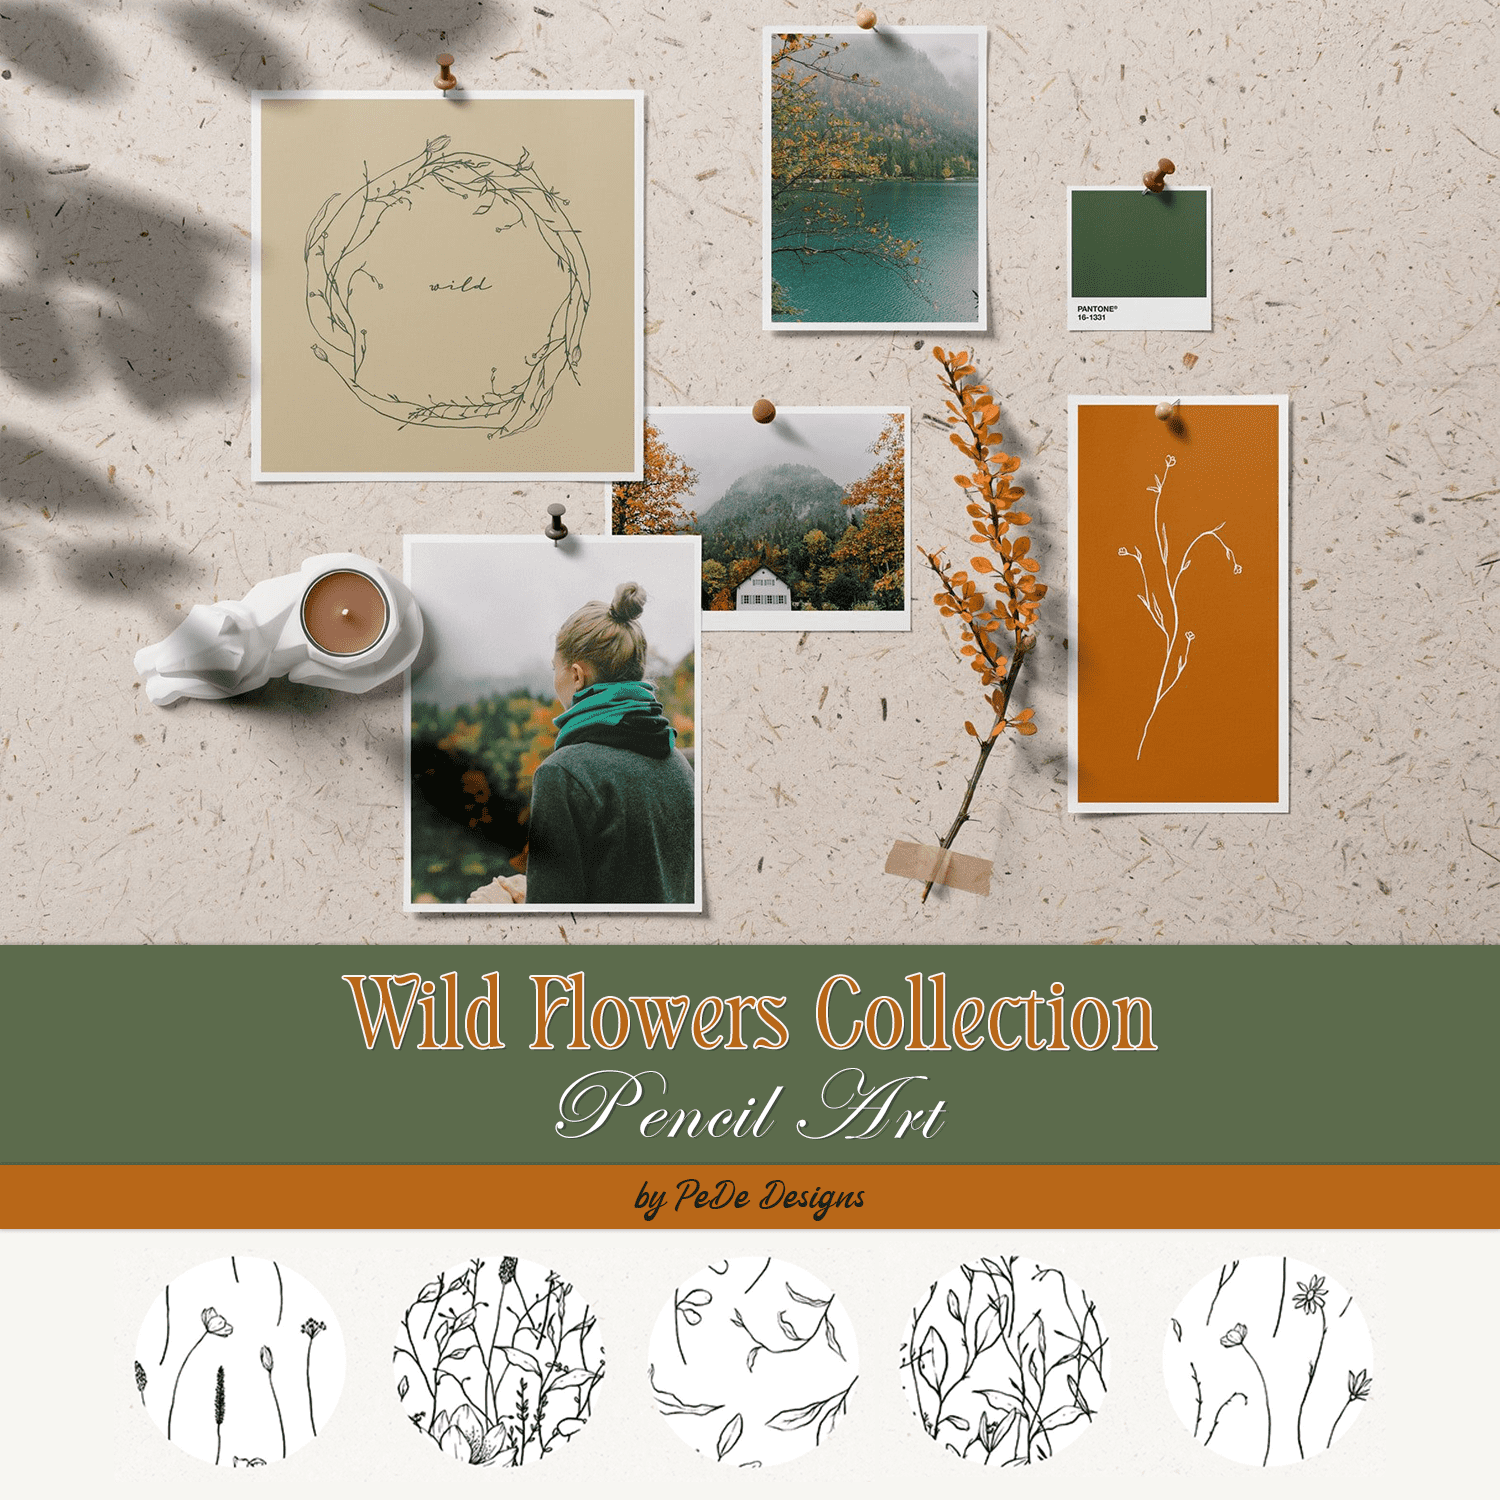 Wild Flowers Collection. Pencil Art. cover.